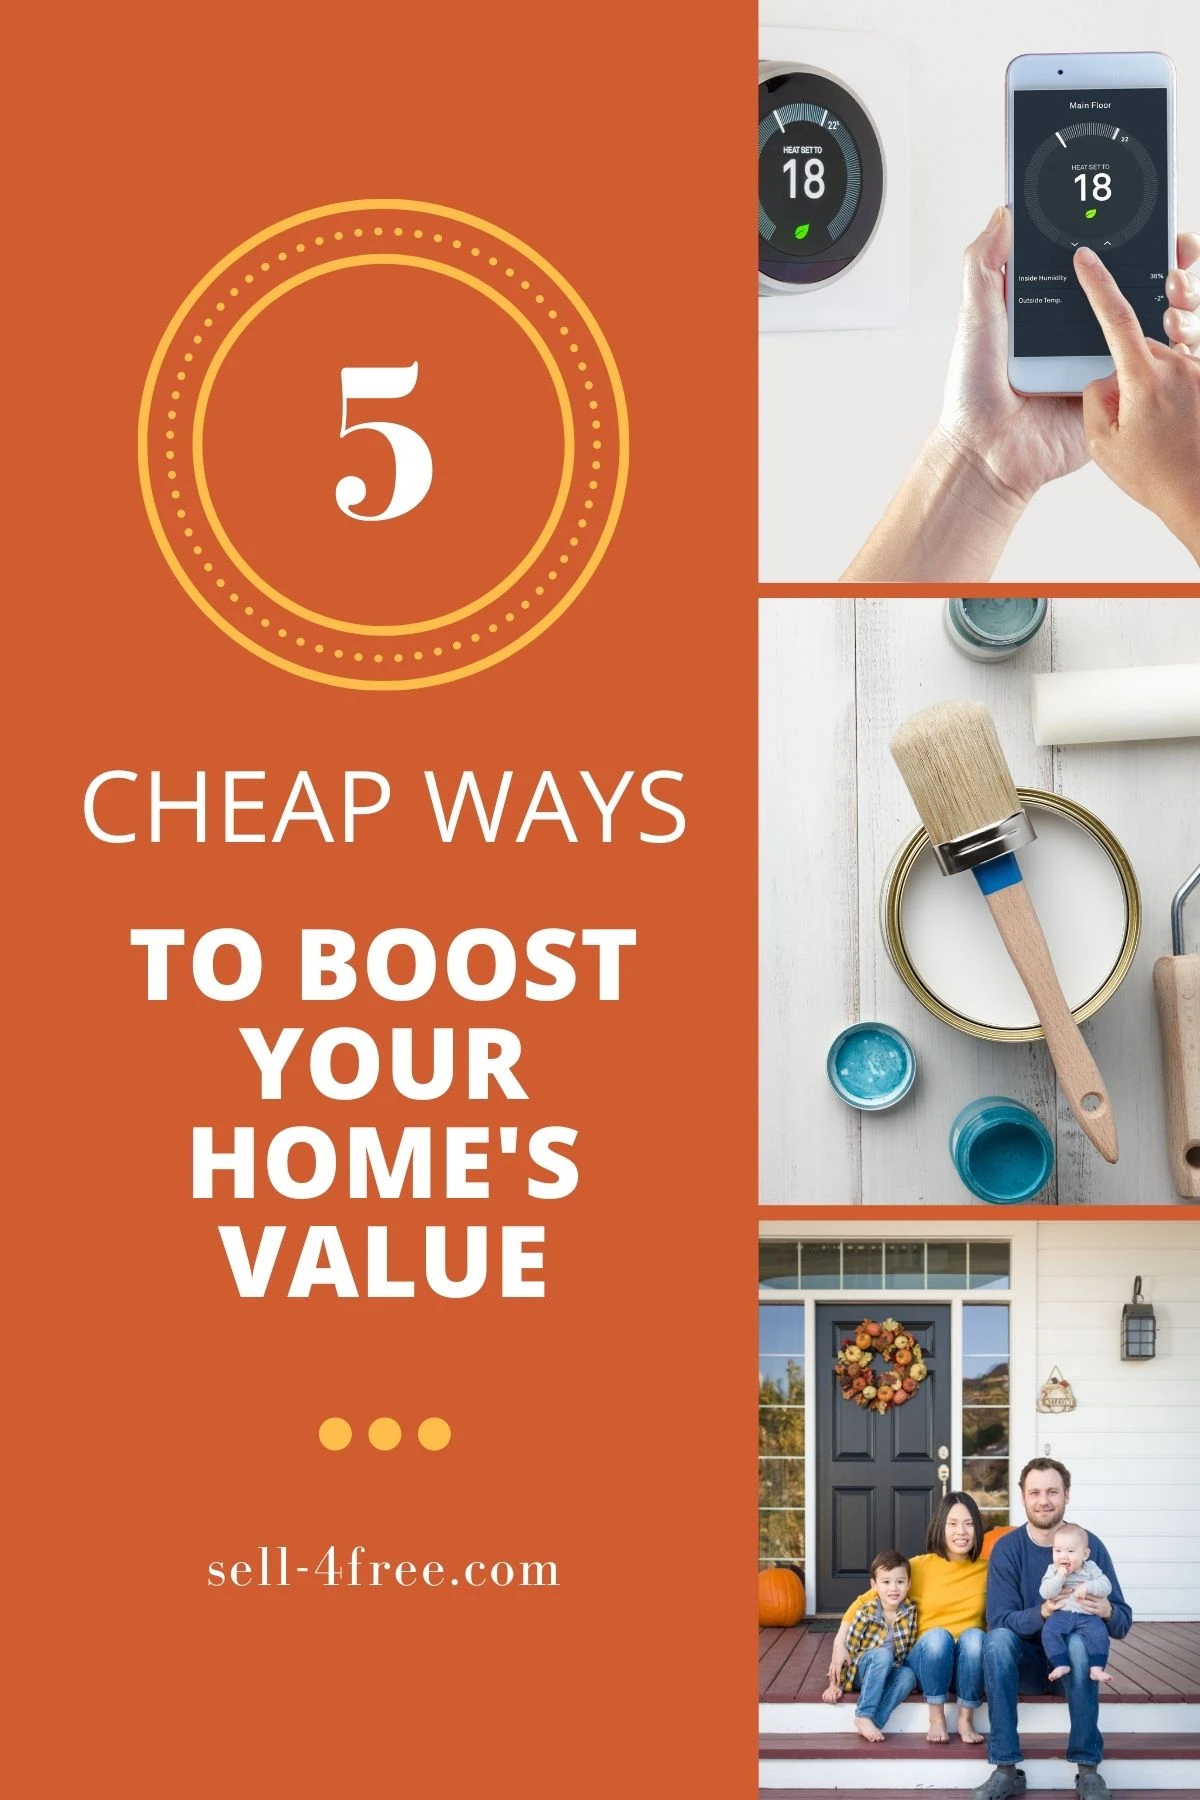 5 Cheap Ways to Boost Your Home’s Value